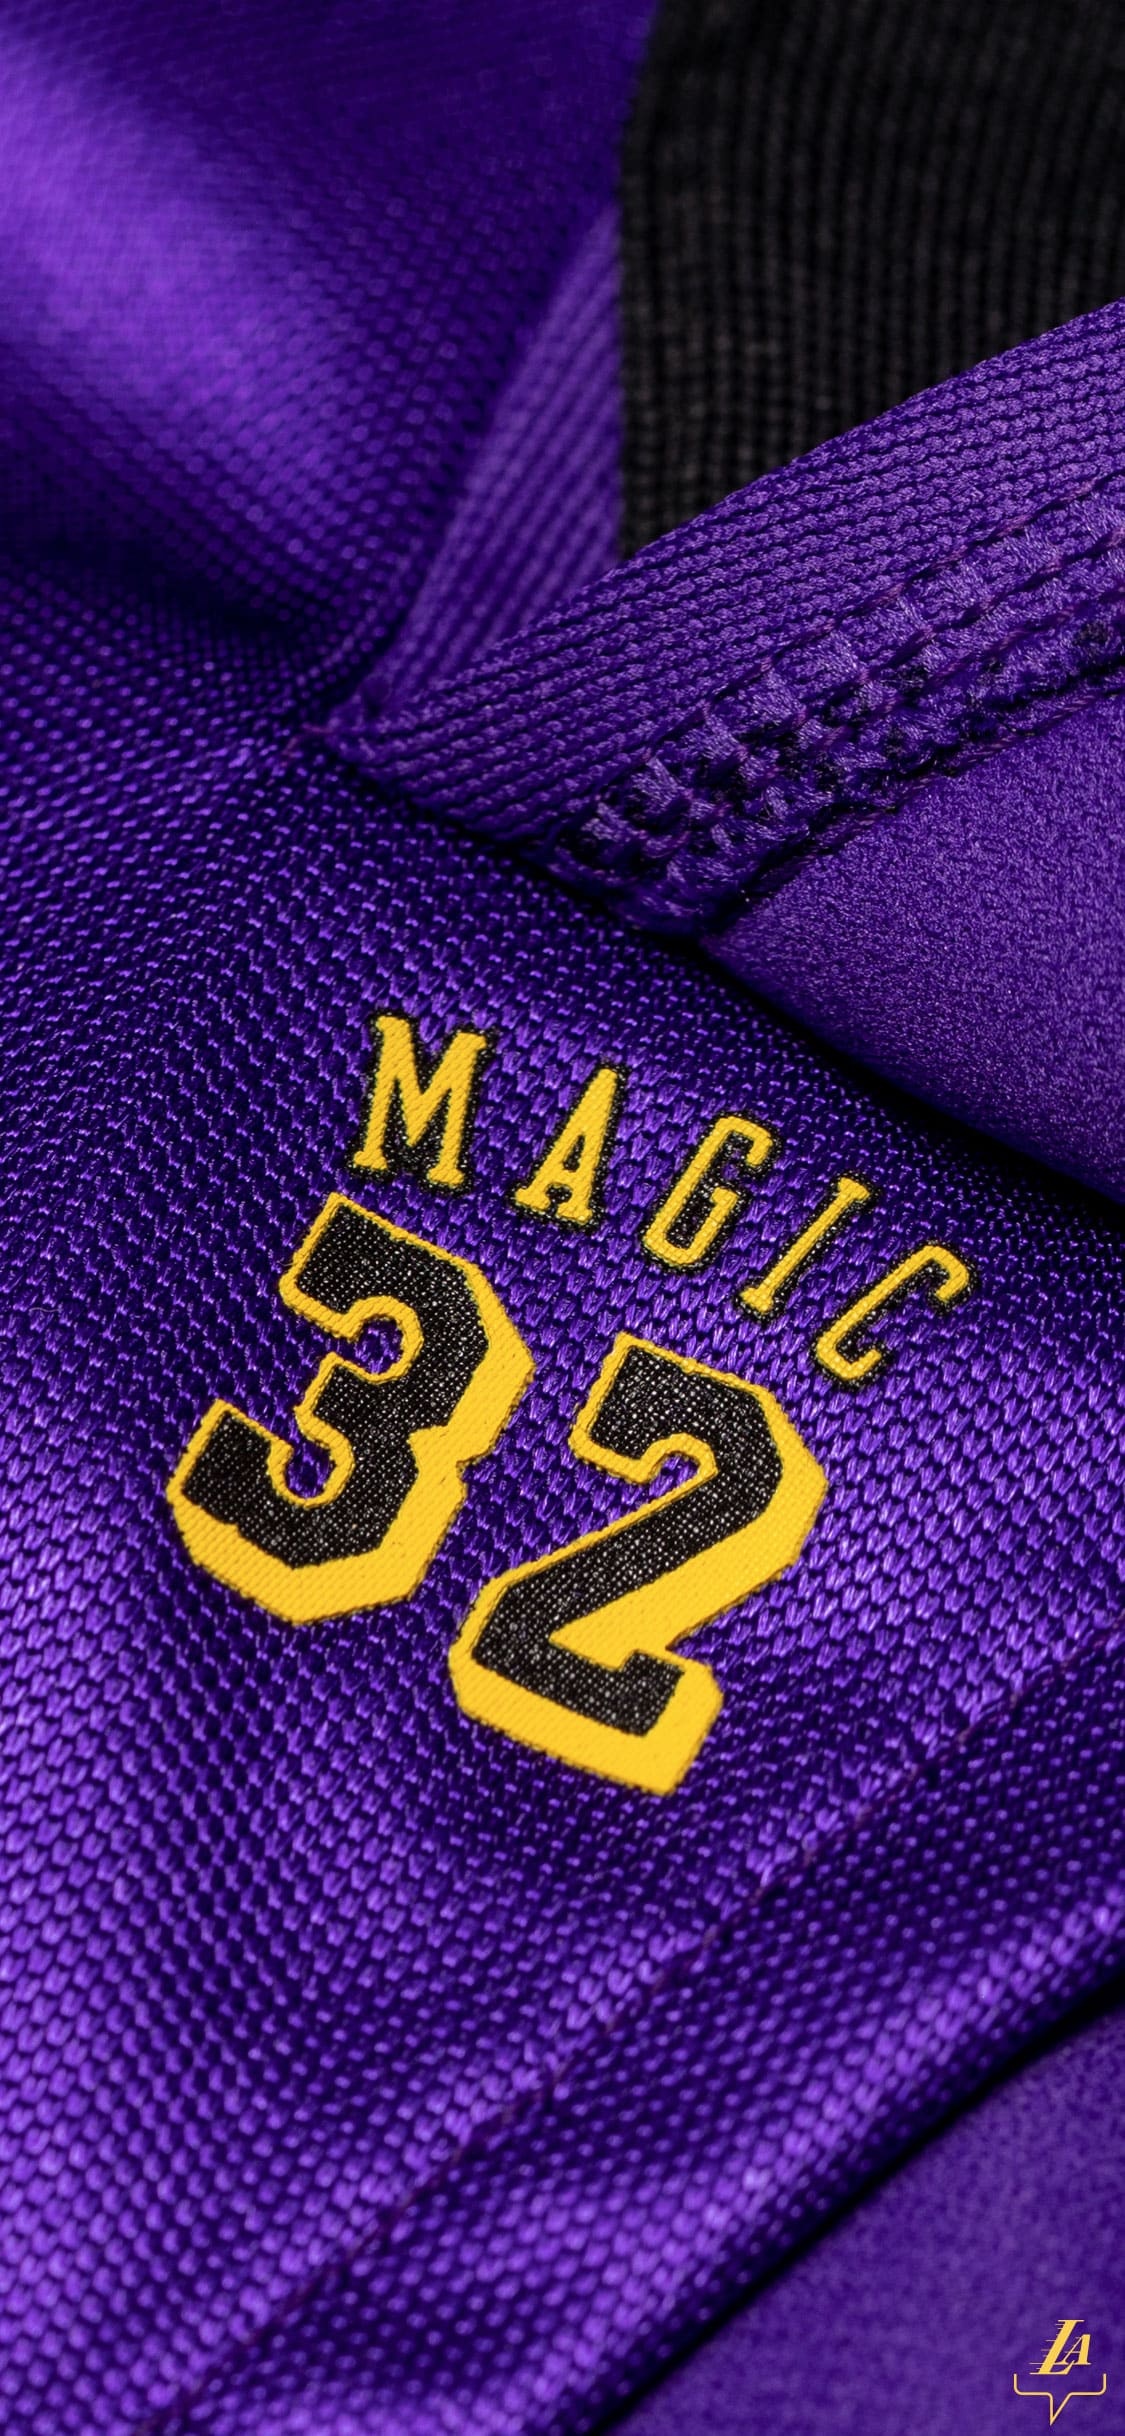 Los Angeles Lakers: The team drafted Magic Johnson first overall in the 1979 NBA draft. 1130x2440 HD Wallpaper.